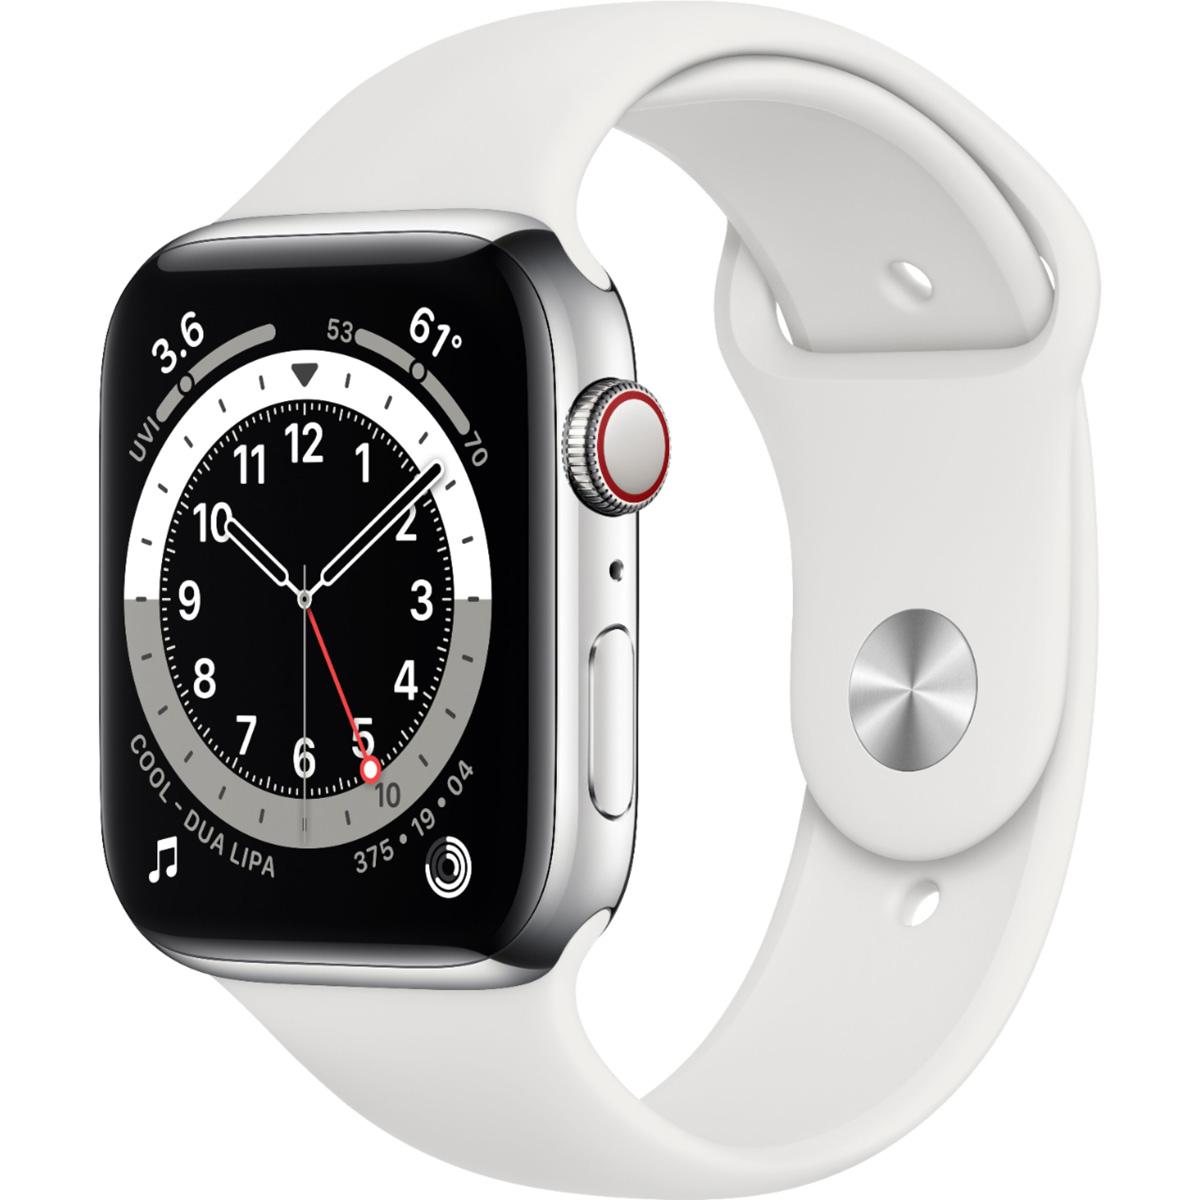 Apple Watch Series 6 44mm with Cellular for $229.99